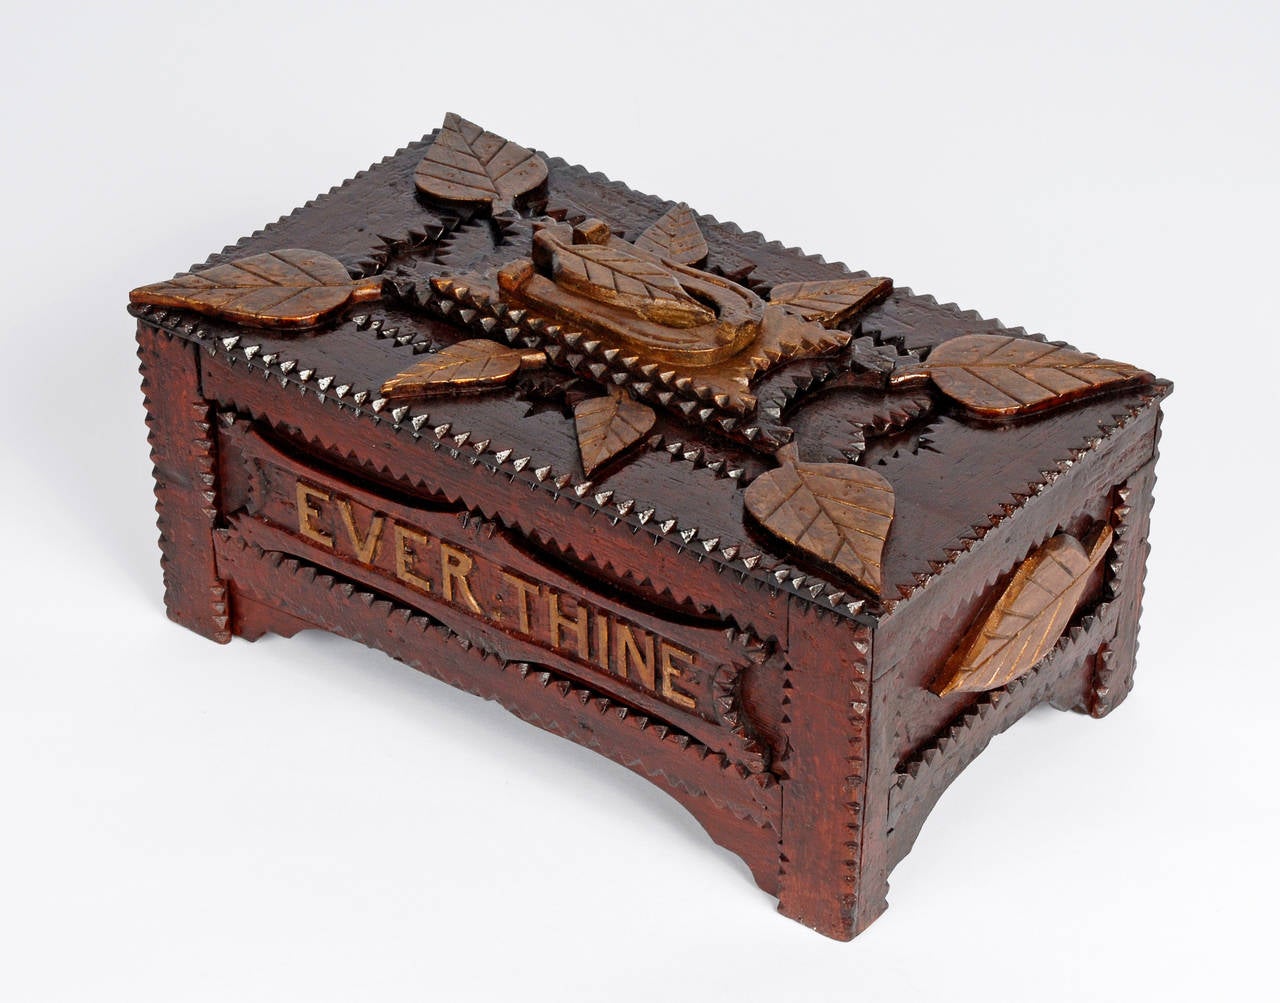 American 'Ever Thine' Inscribed Tramp Art Box with Leaves, Hearts and a Horeshoe